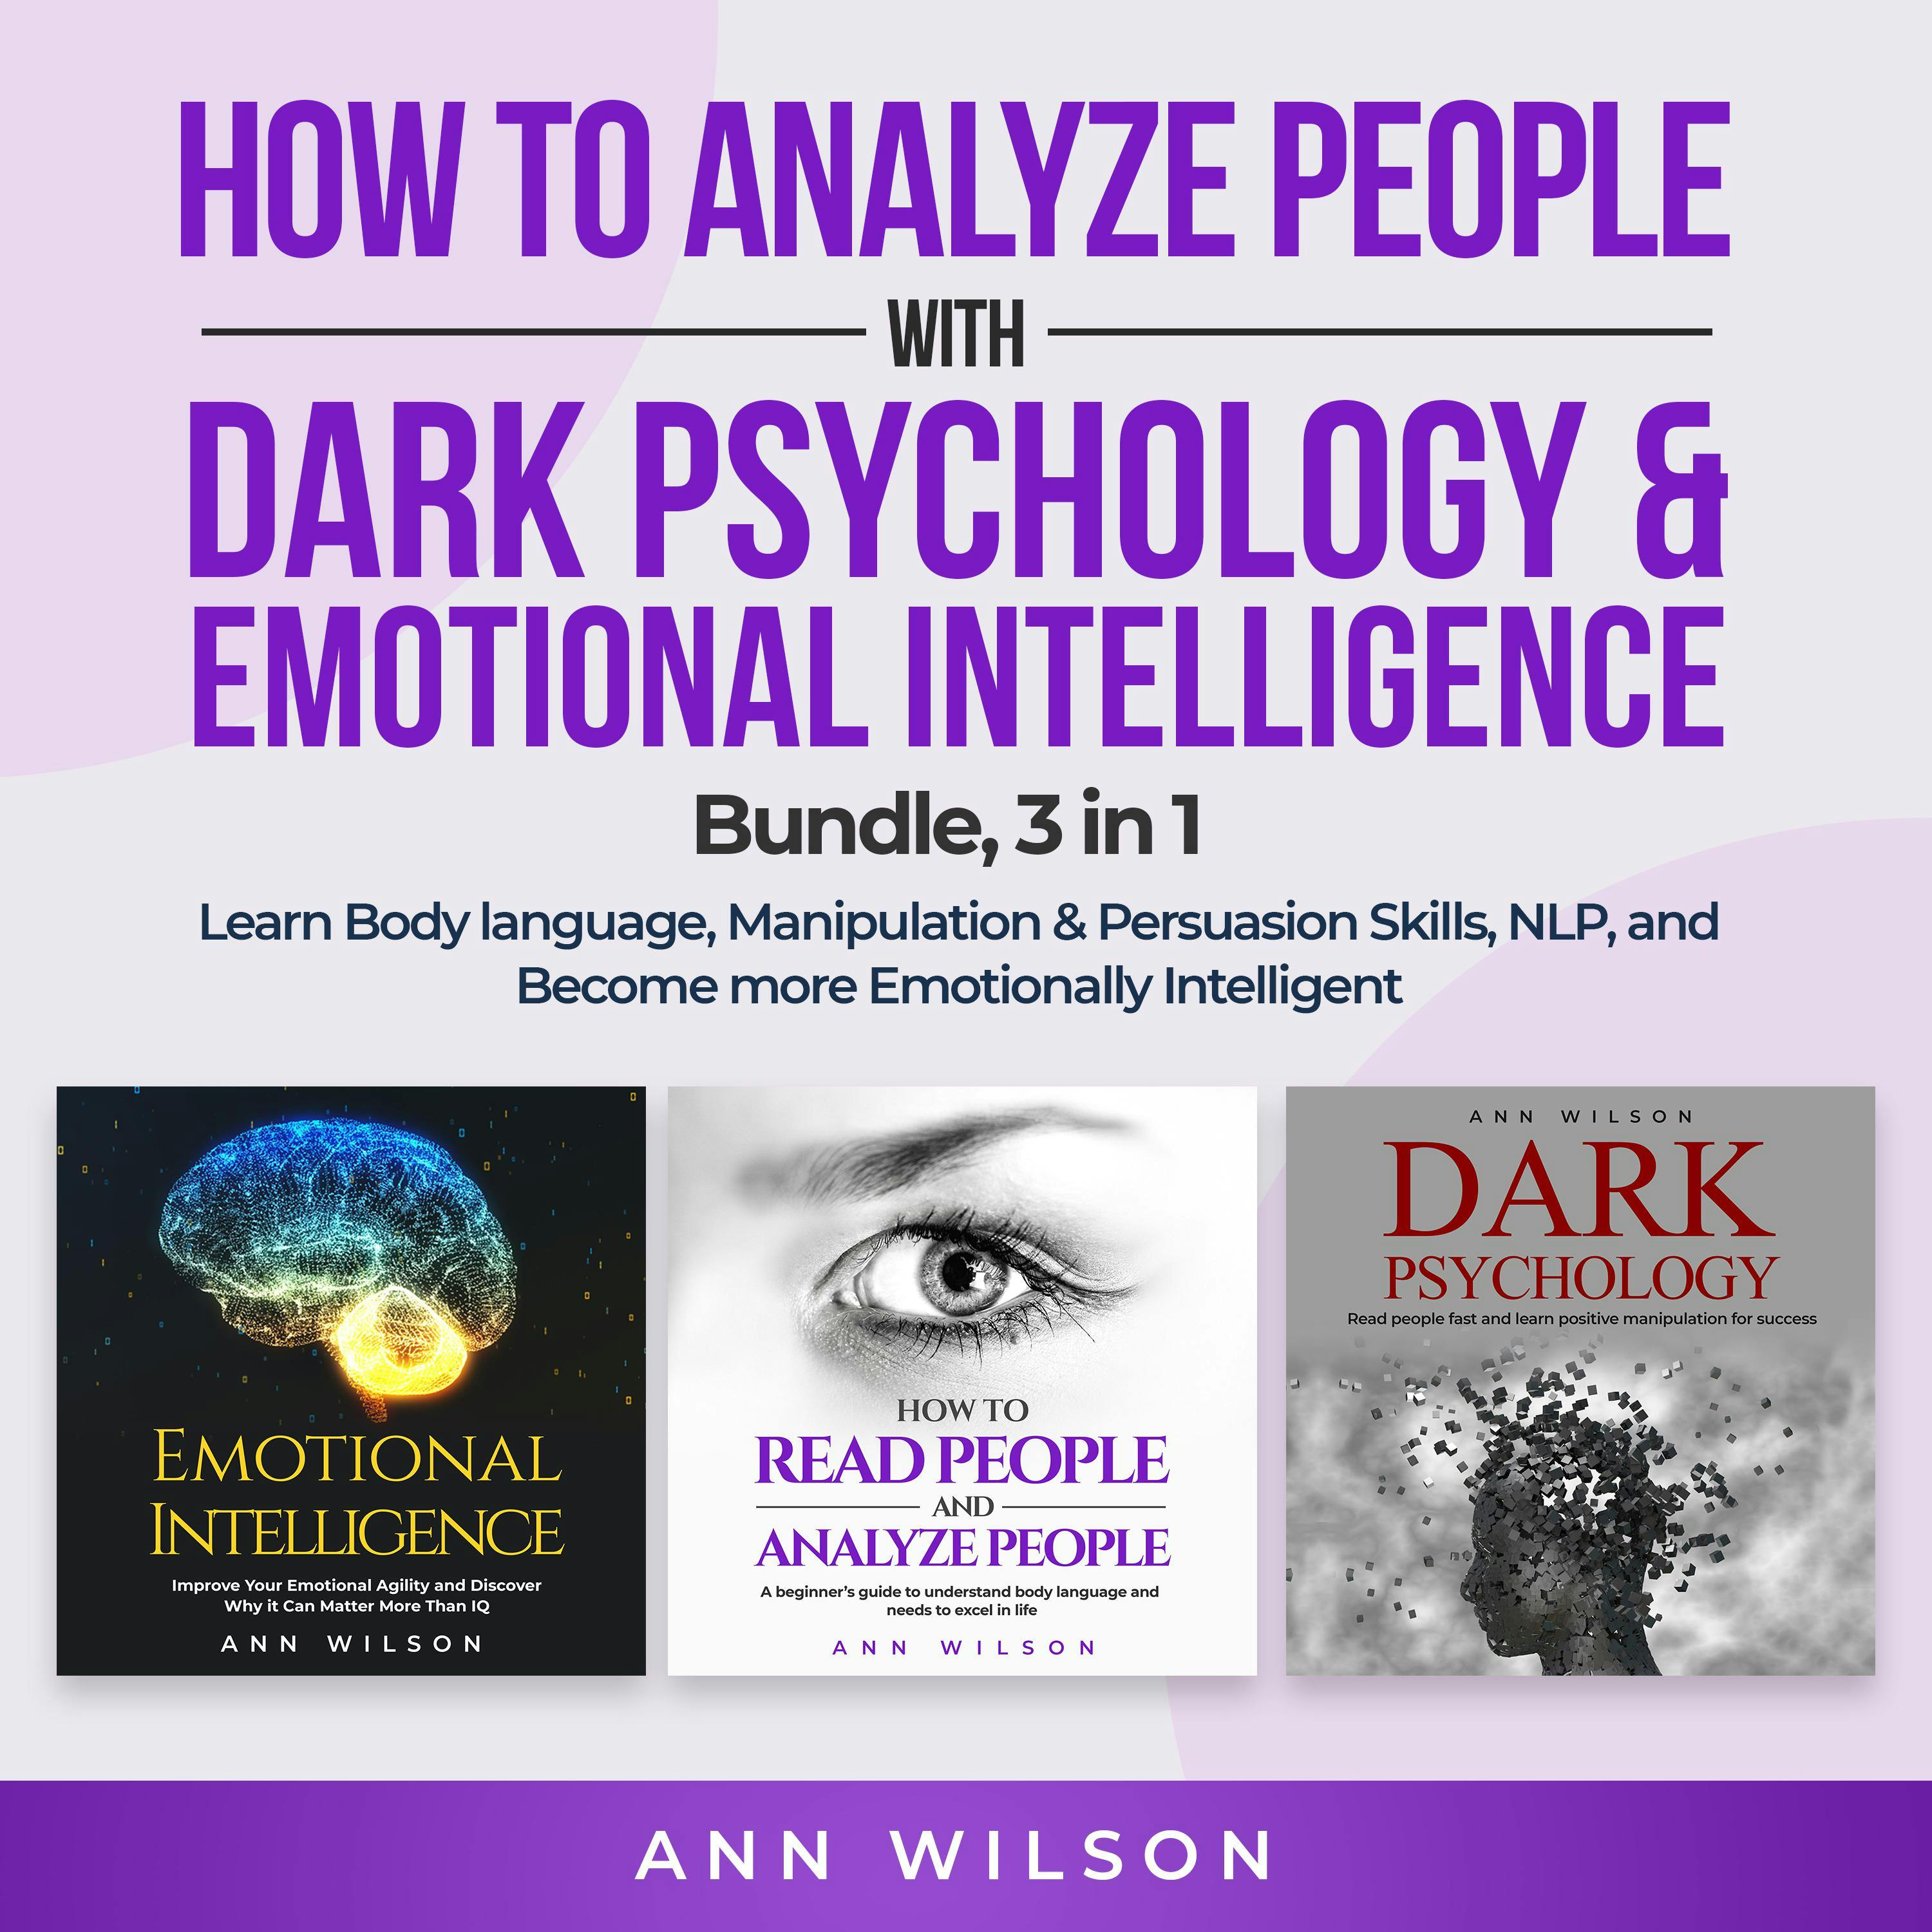 How to Analyze People with Dark Psychology & Emotional Intelligence Bundle, 3 in 1: Learn Body Language, Manipulation & Persuasion Skills, NLP and Become more Emotionally Intelligent - Ann Wilson